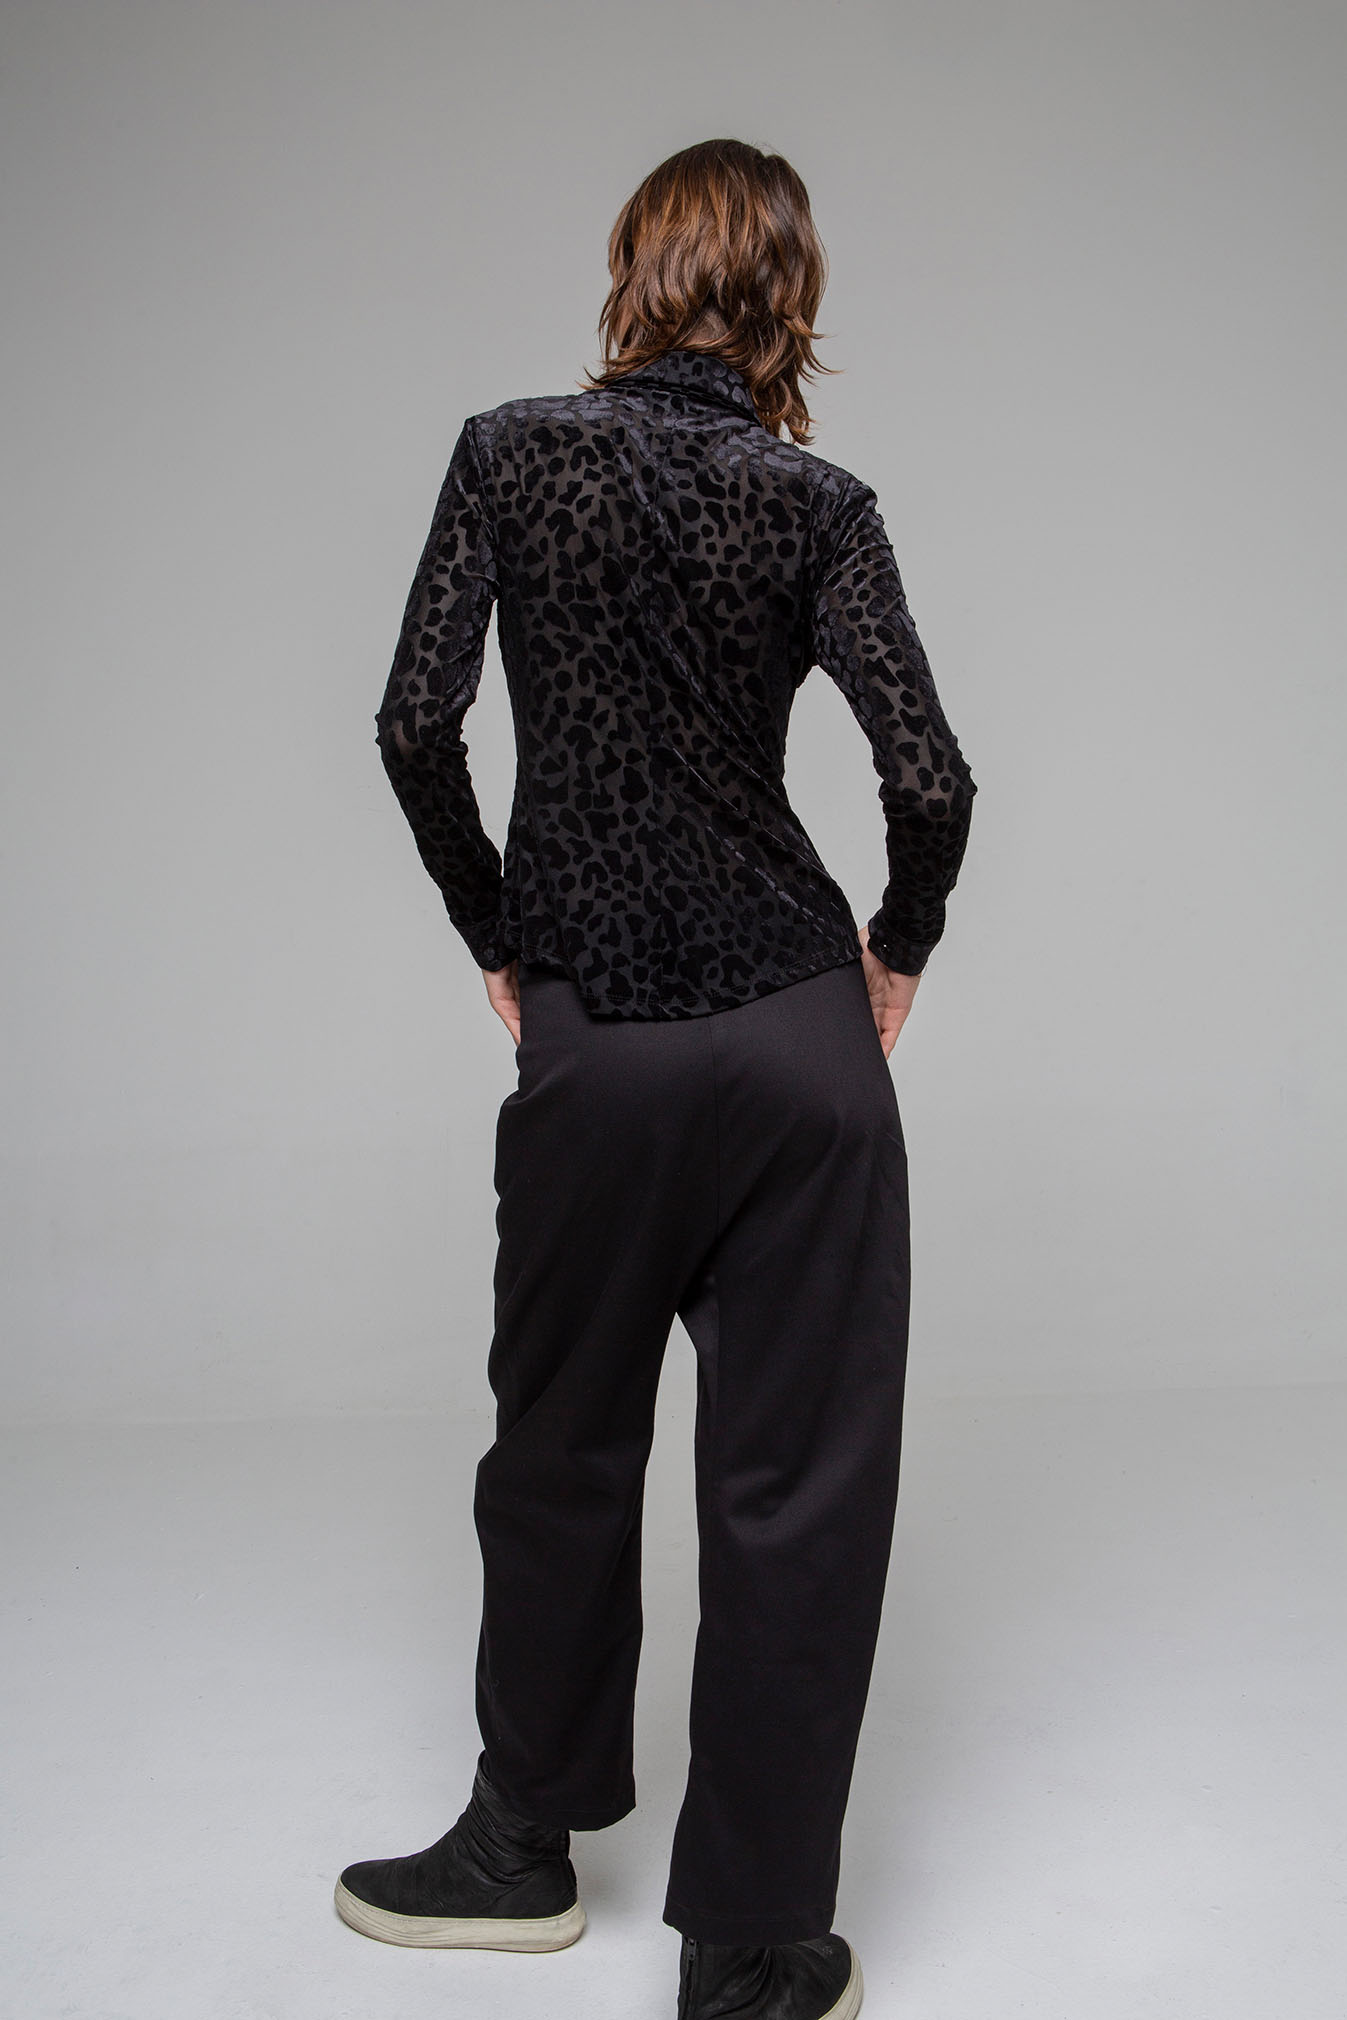 Women's Pegged Pants by Noble Athens